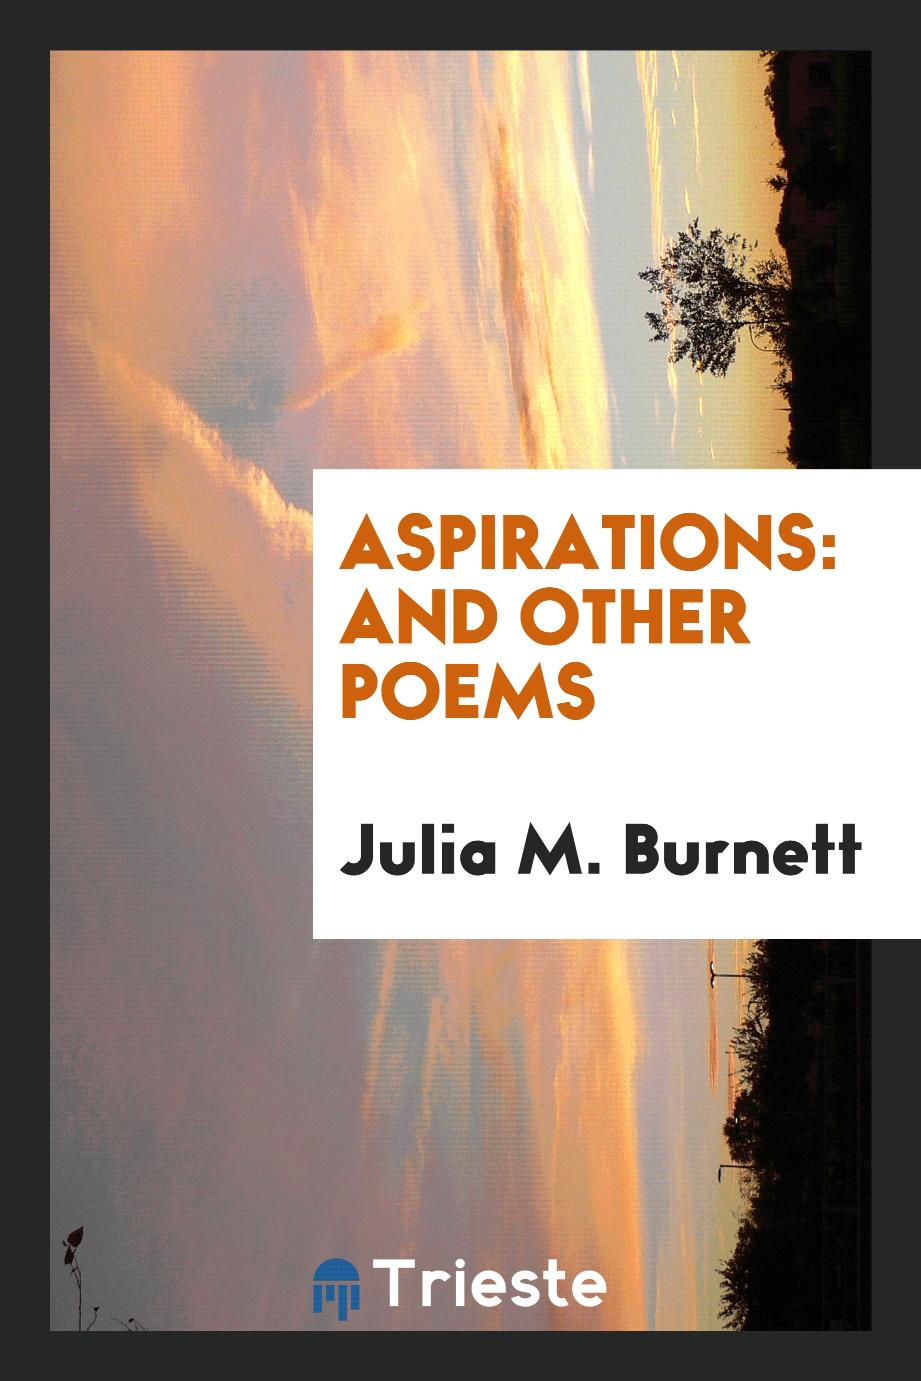 Aspirations: And Other Poems